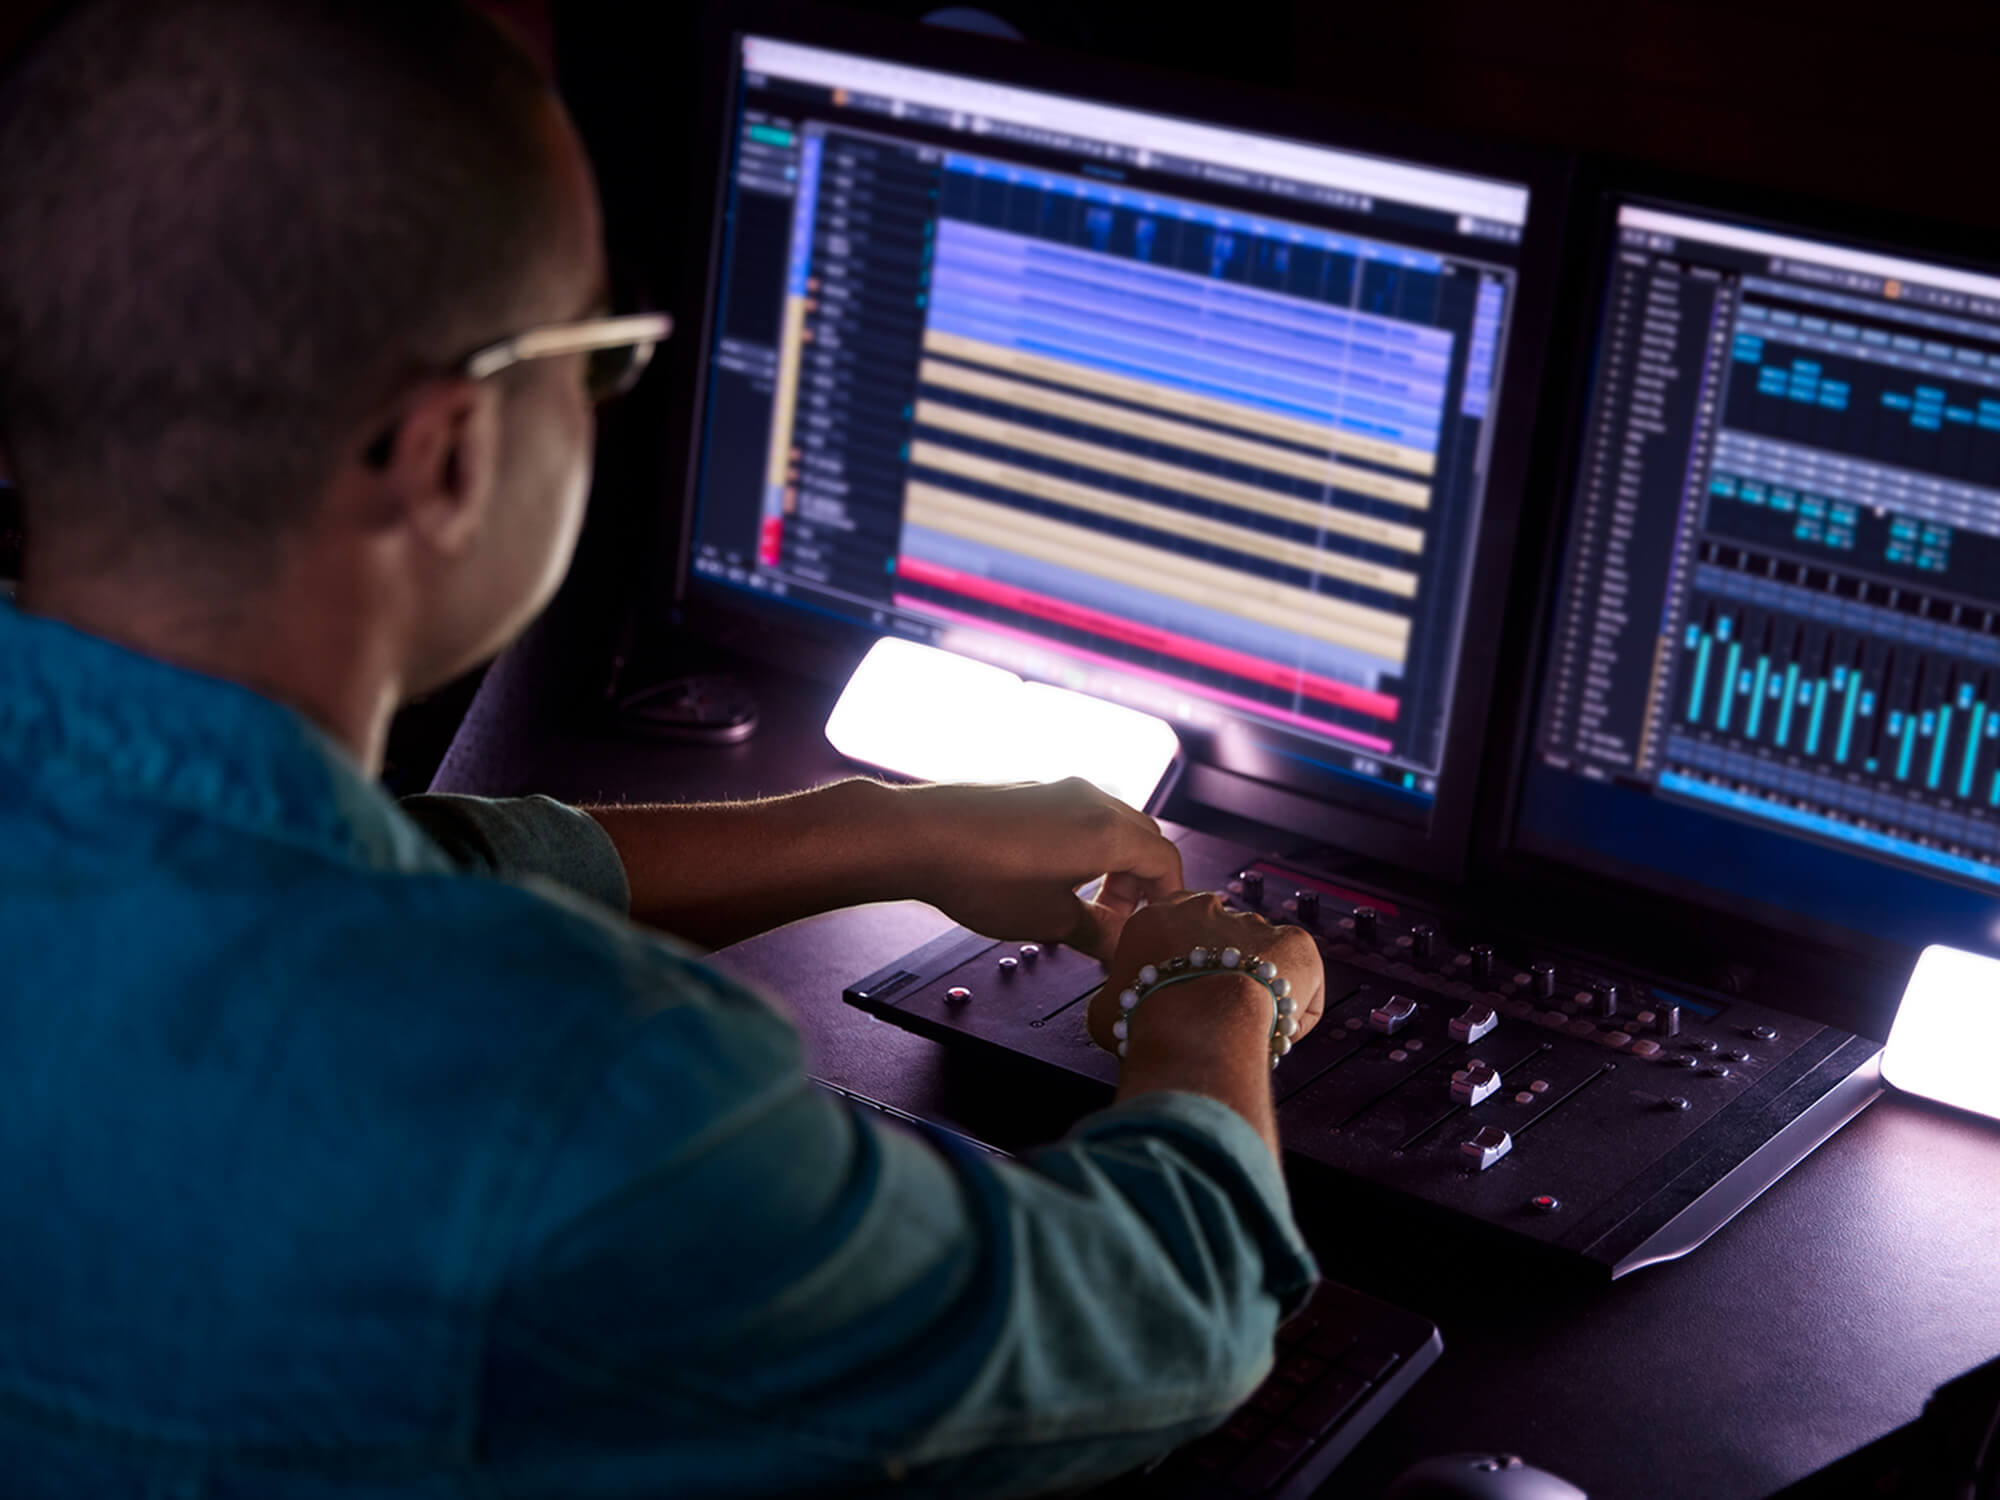 Producer working in music studio, photo by wundervisuals via Getty Images